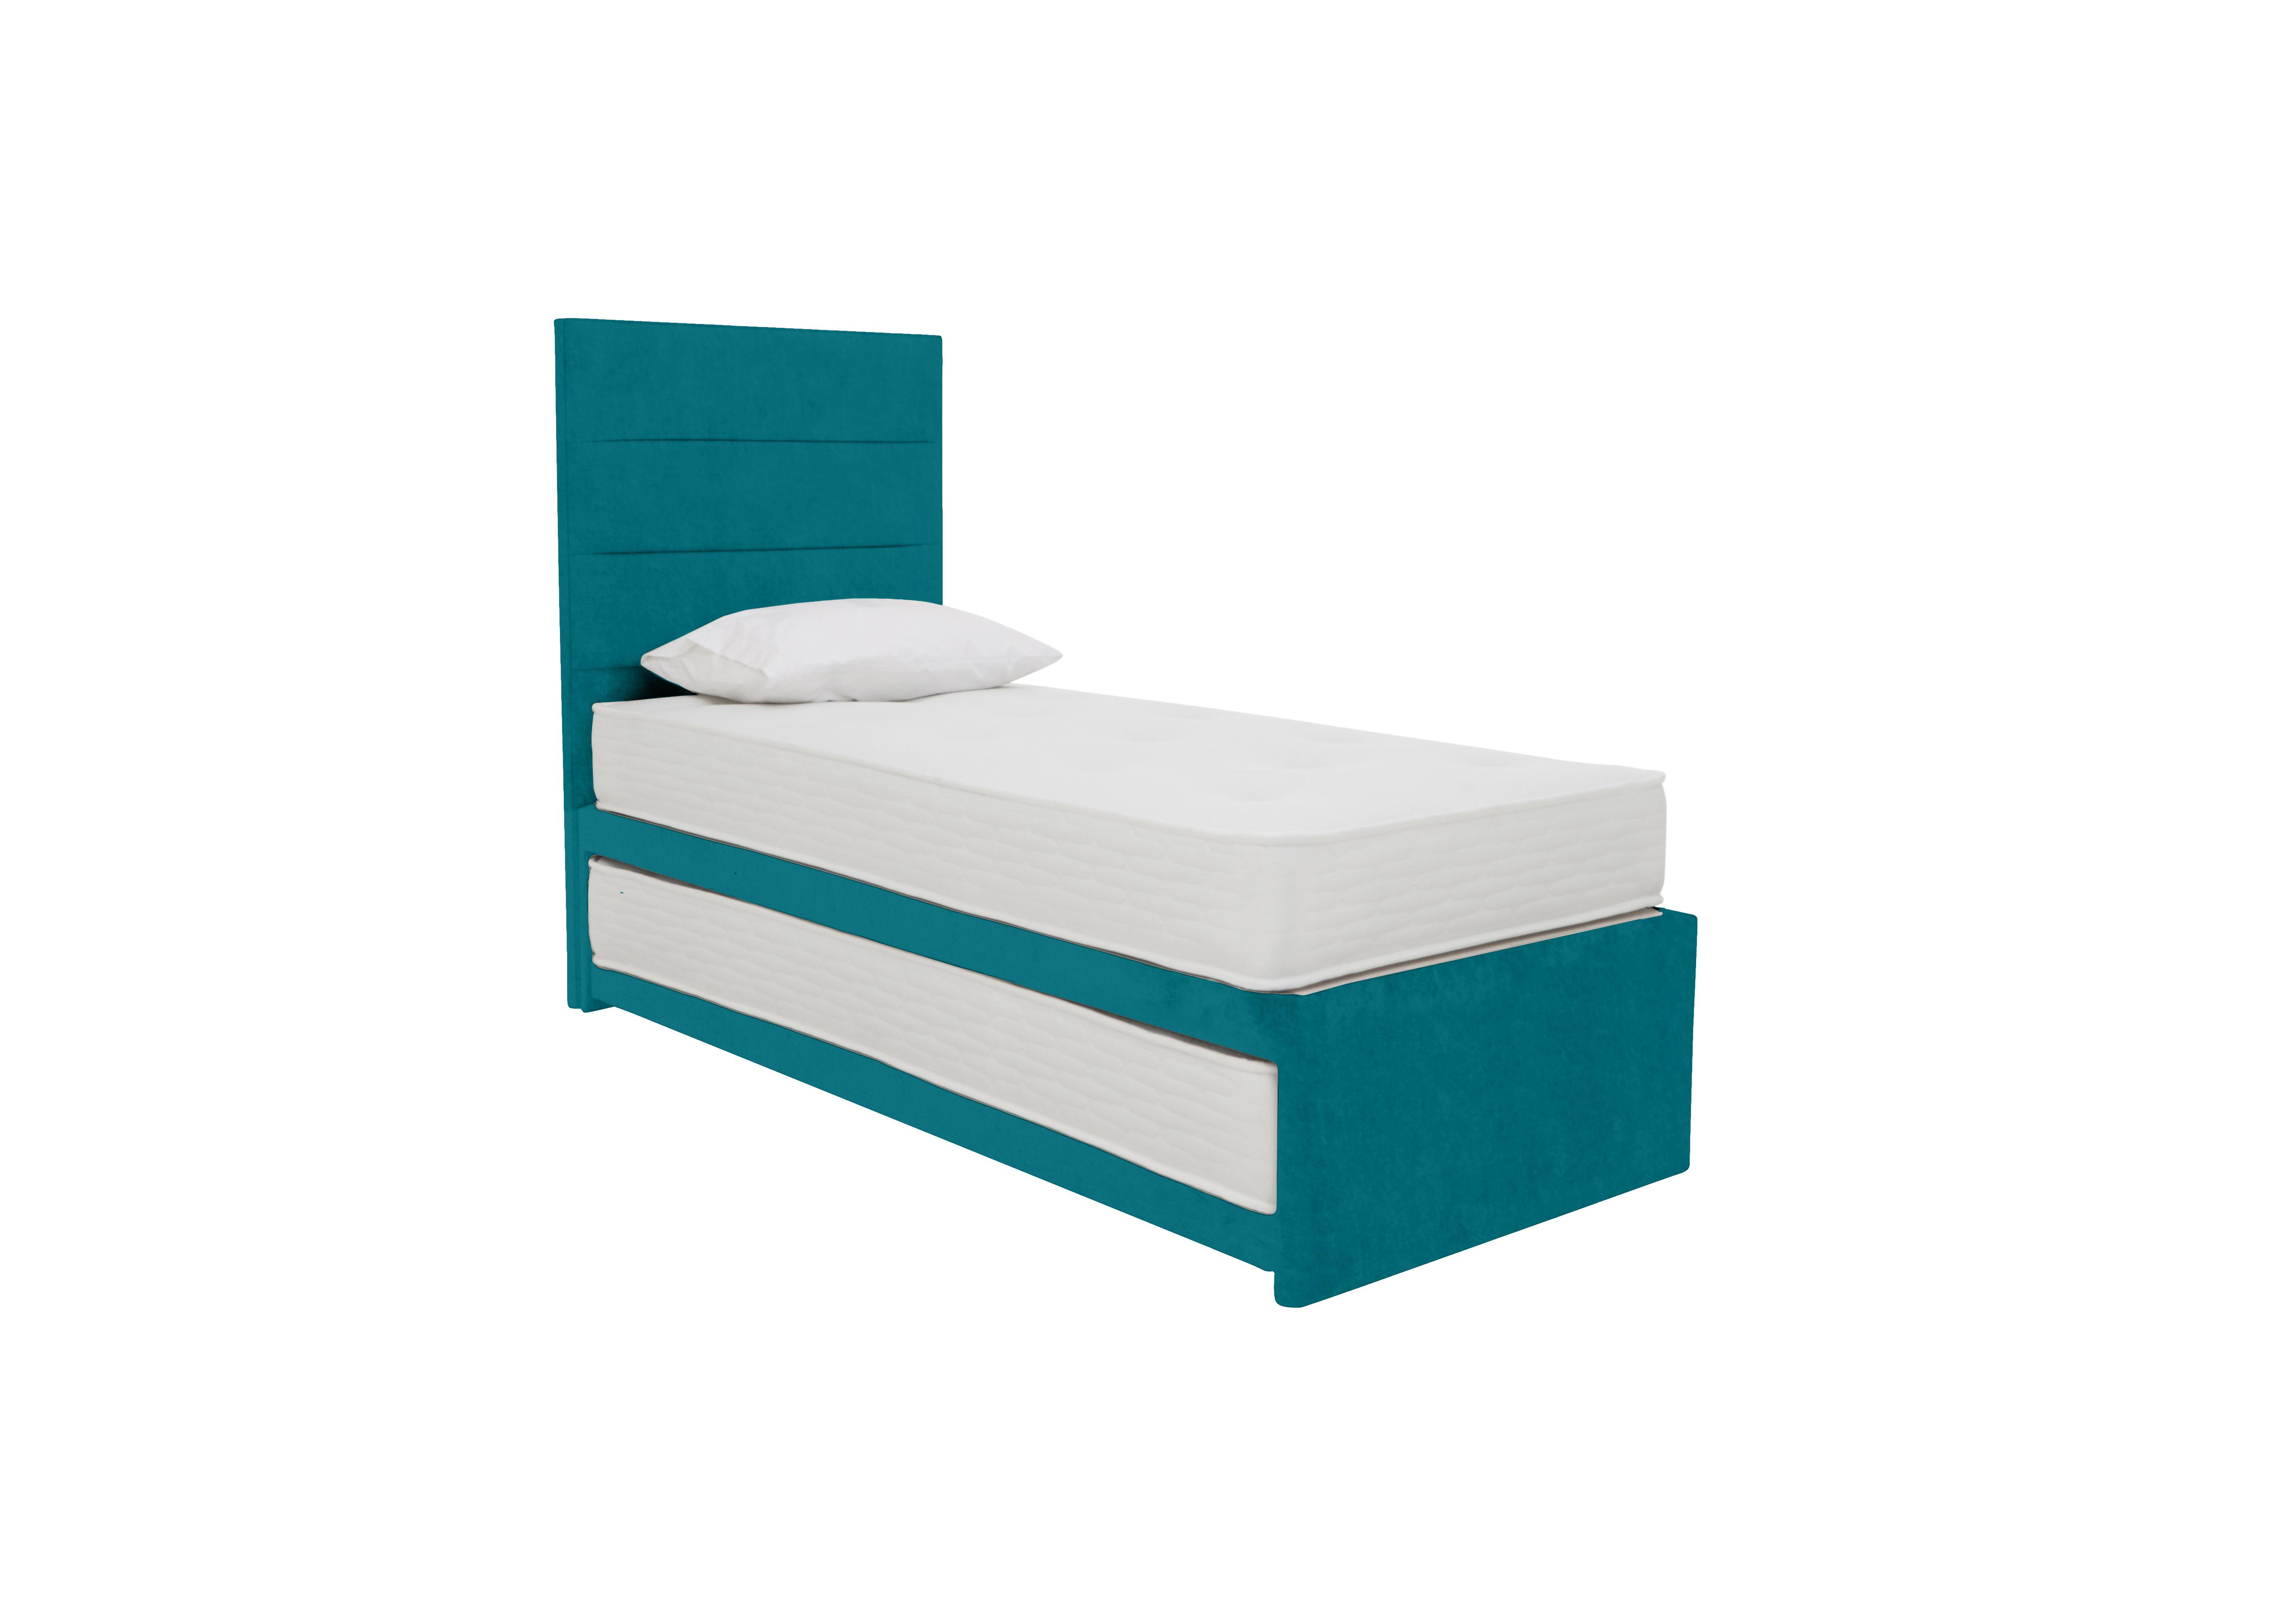 Guest Bed with Pocket Sprung Mattress in Plush Atlantic on Furniture Village